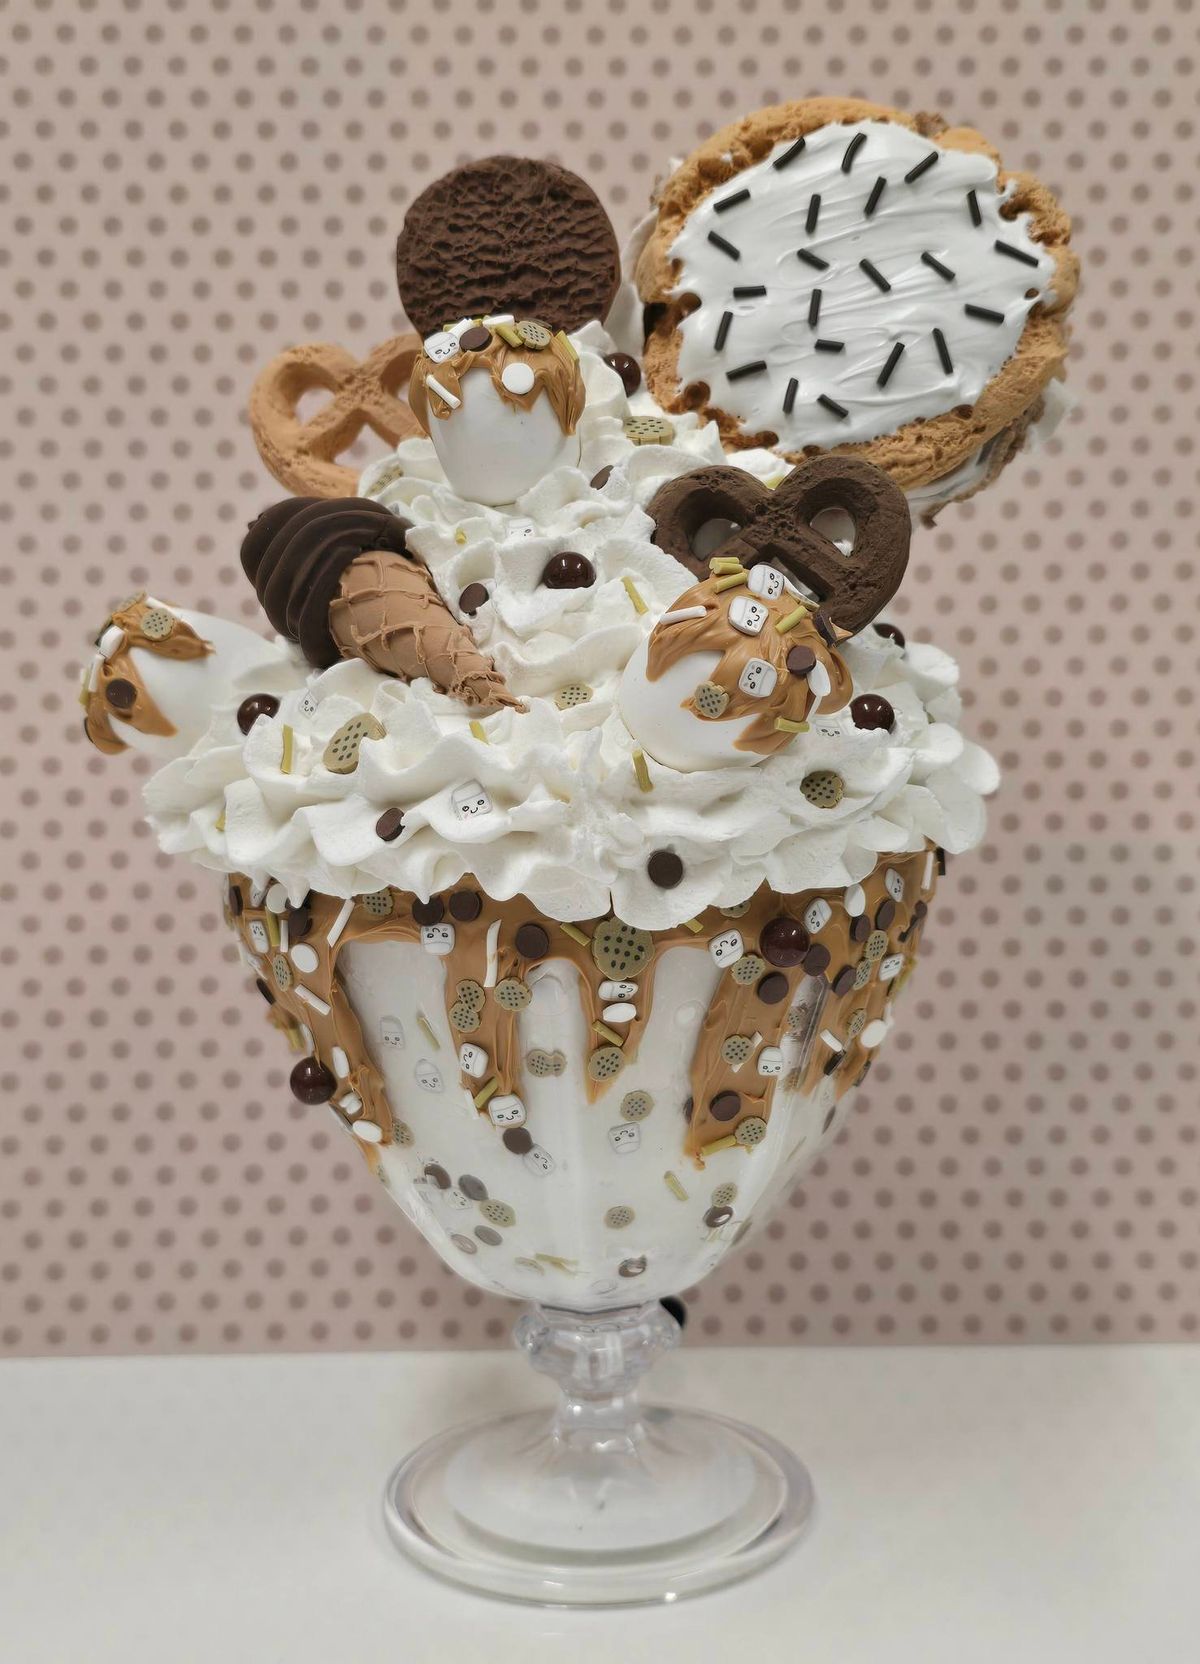 Learn how to make your own faux Ice Cream Sundae